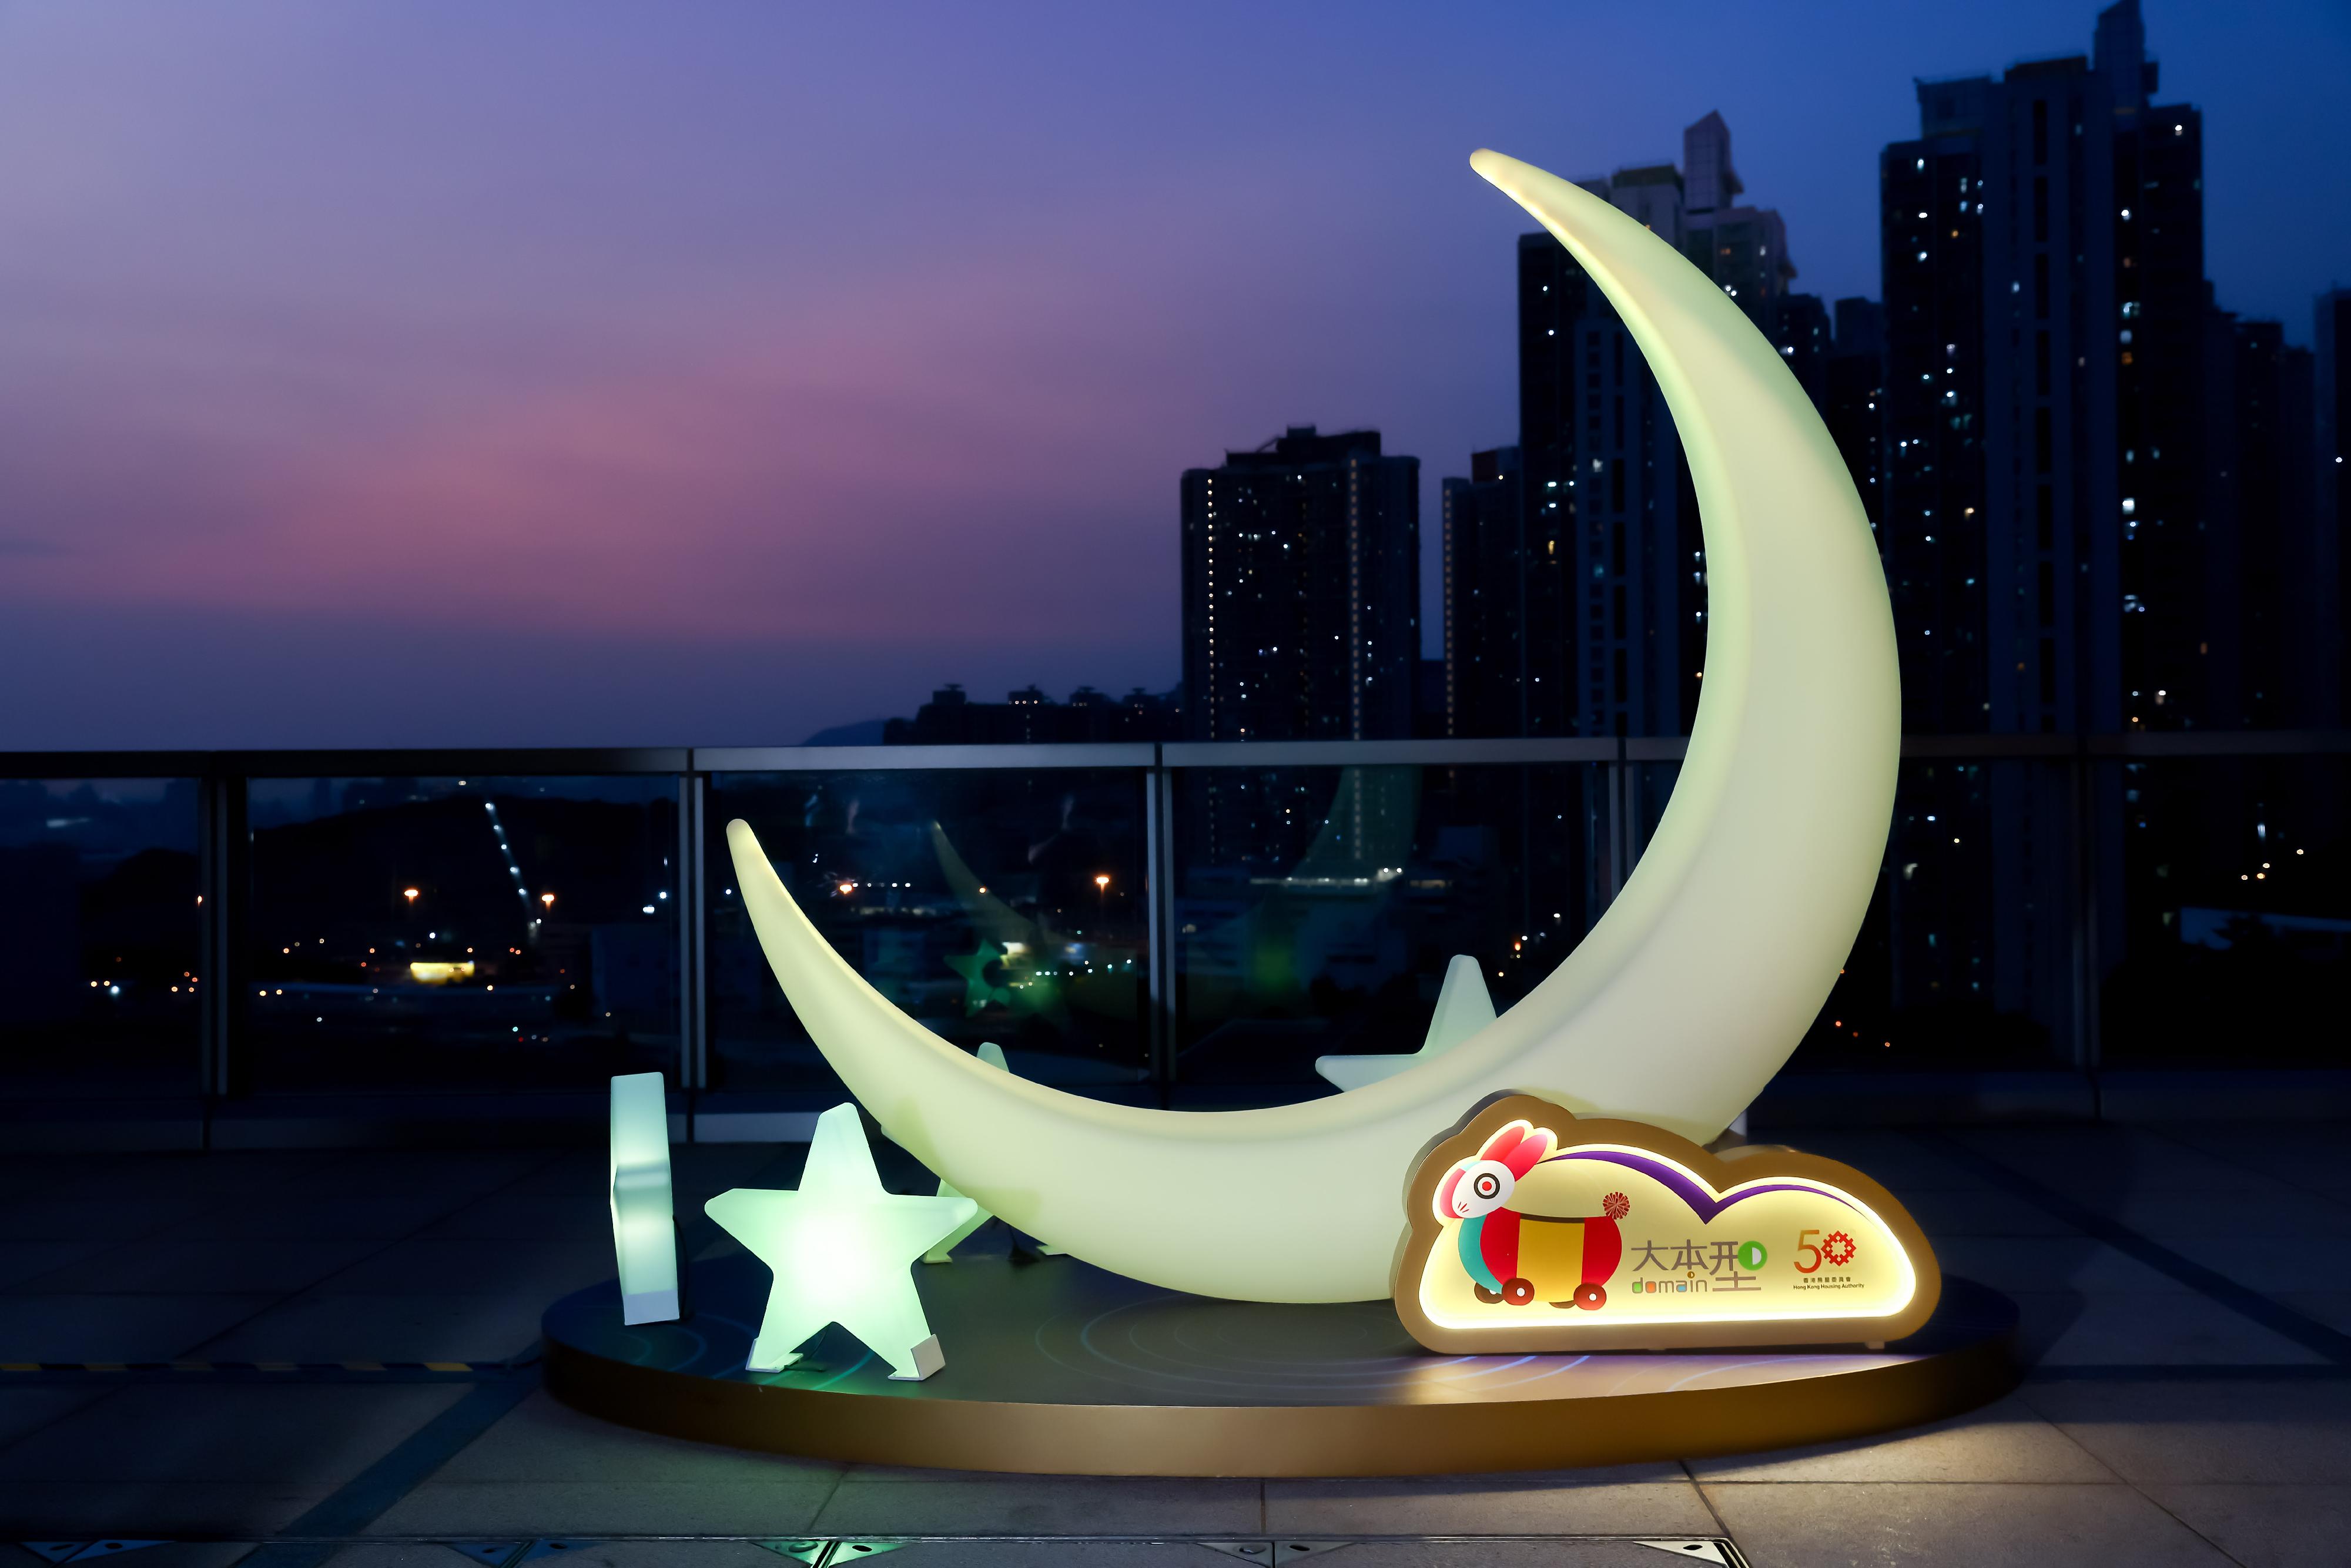 Hong Kong Housing Authority (HA) shopping centres are joining the Night Vibes Hong Kong campaign to hold promotion activities for celebration of the Mid-Autumn Festival and National Day. Photo shows a smiley moon lantern at the roof garden at Domain, the HA's flagship shopping centre in Yau Tong, East Kowloon.